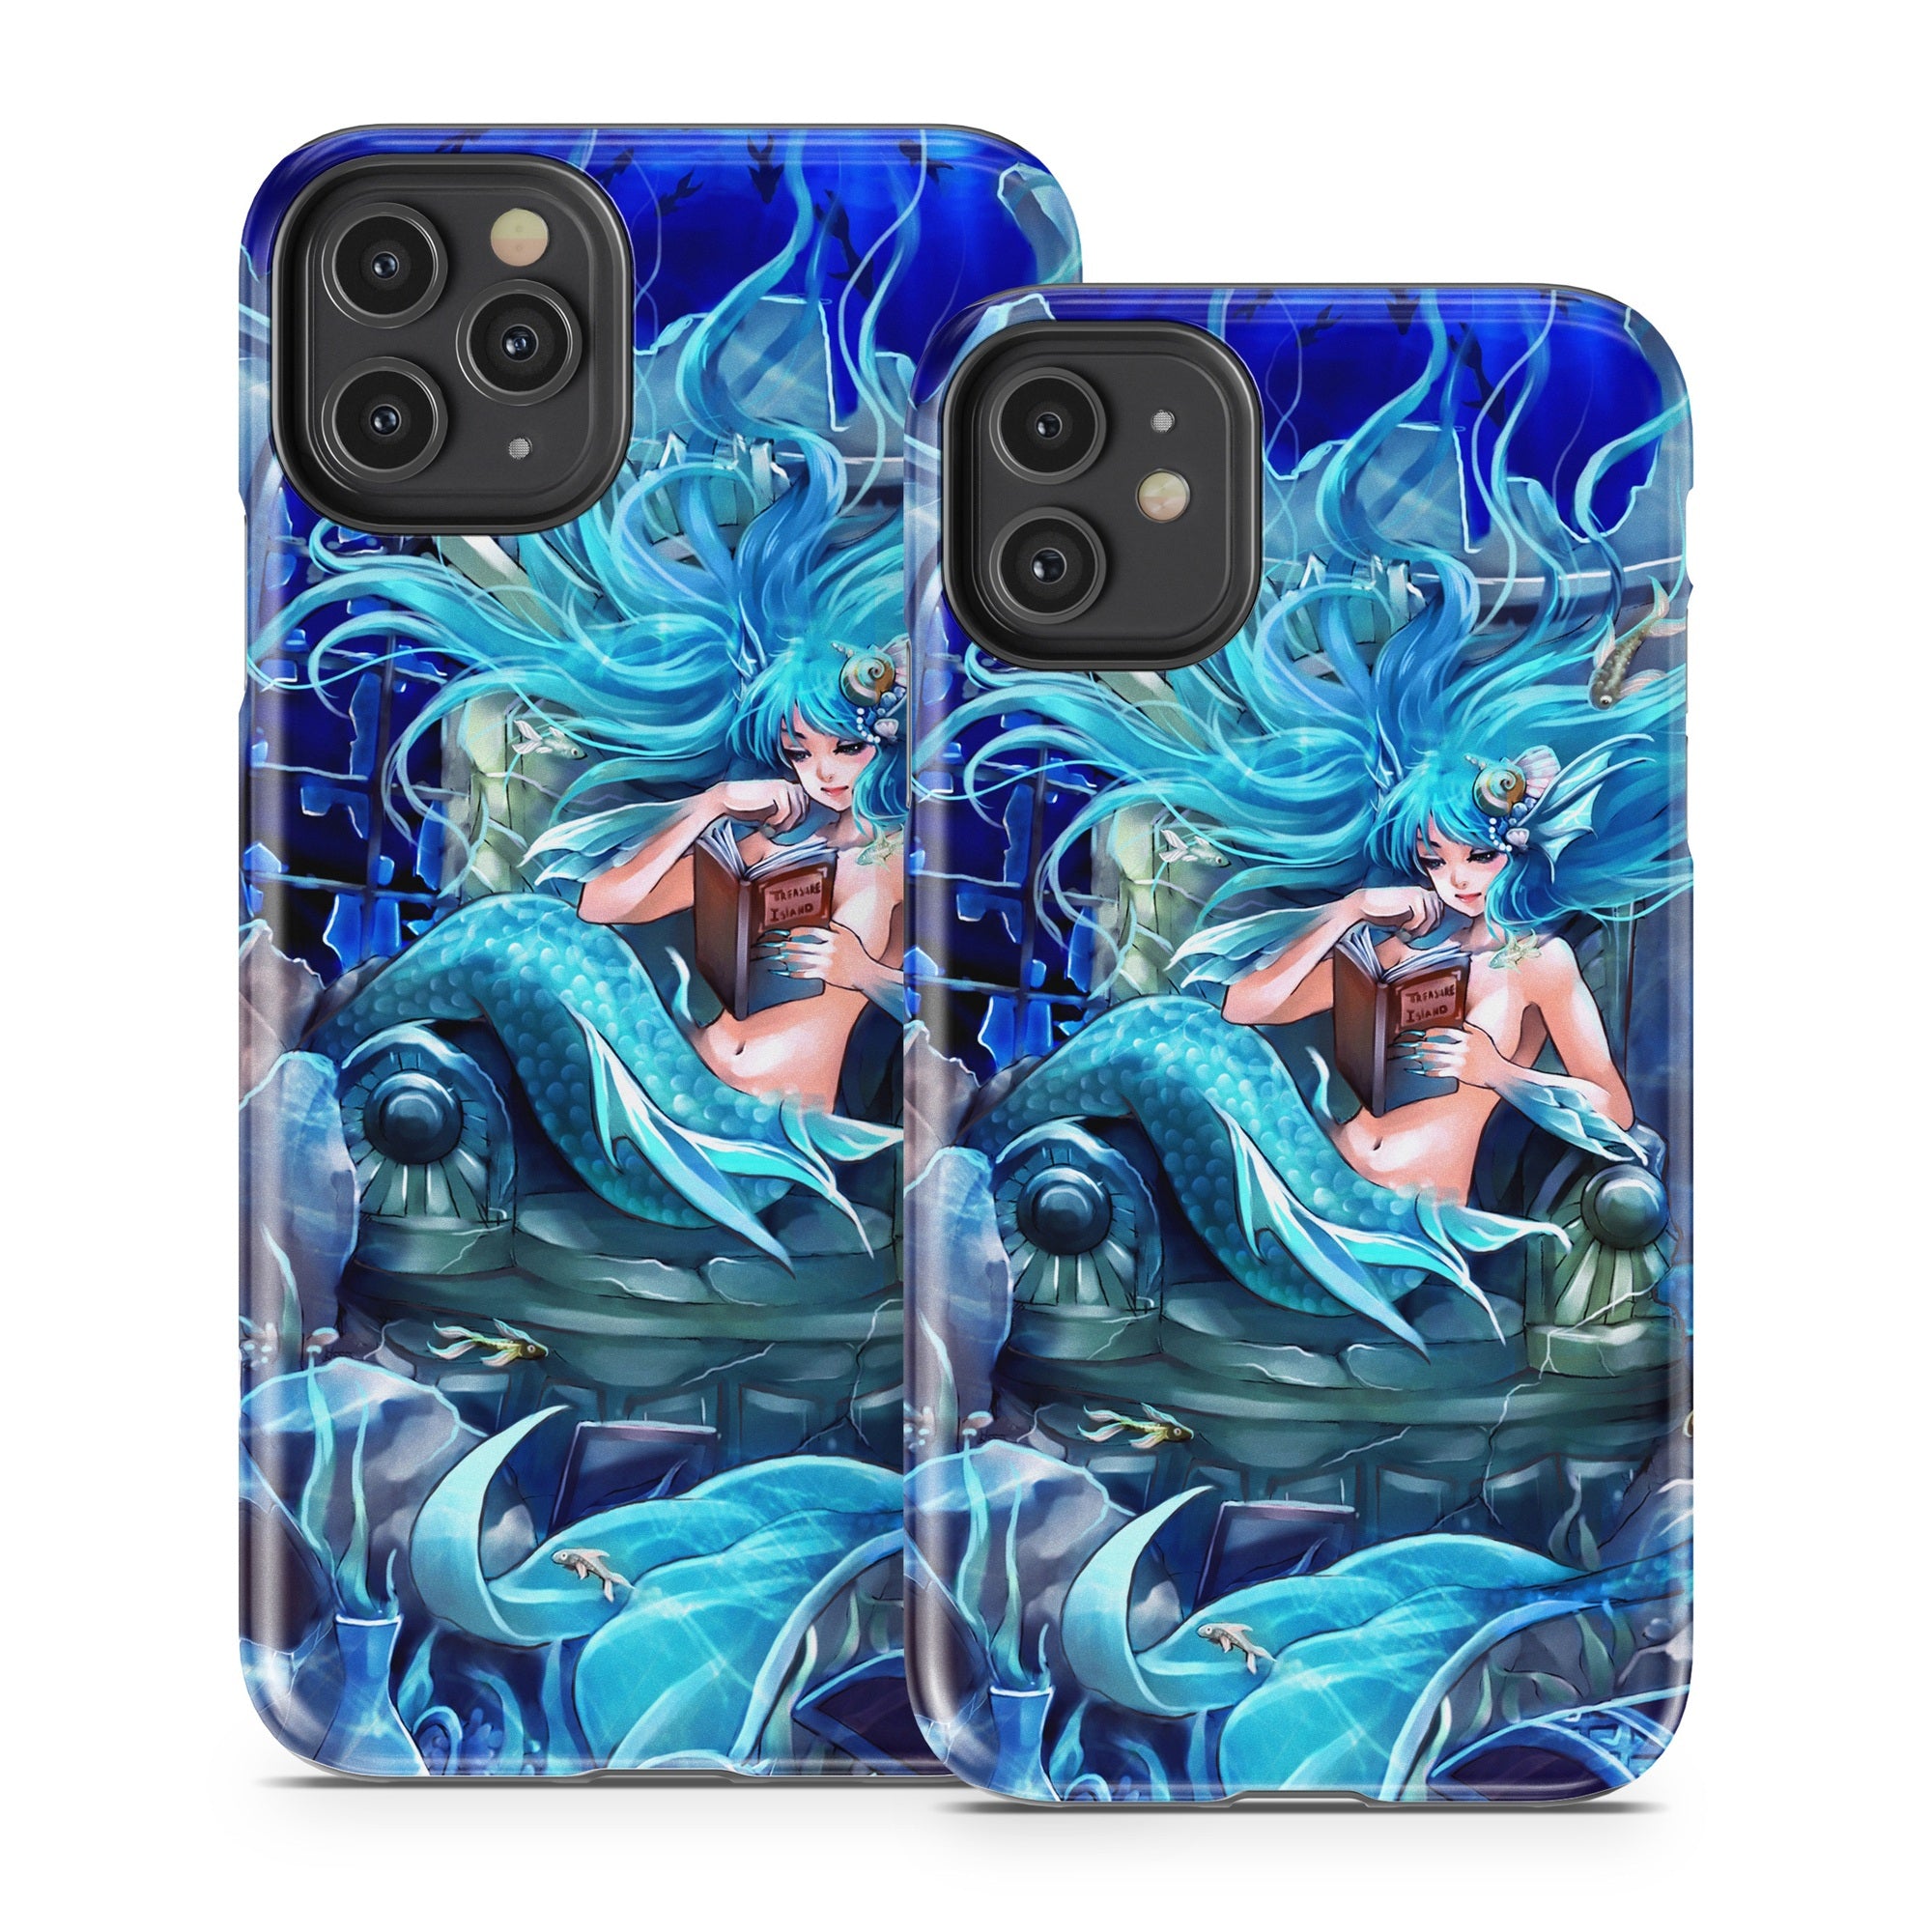 In Her Own World - Apple iPhone 11 Tough Case